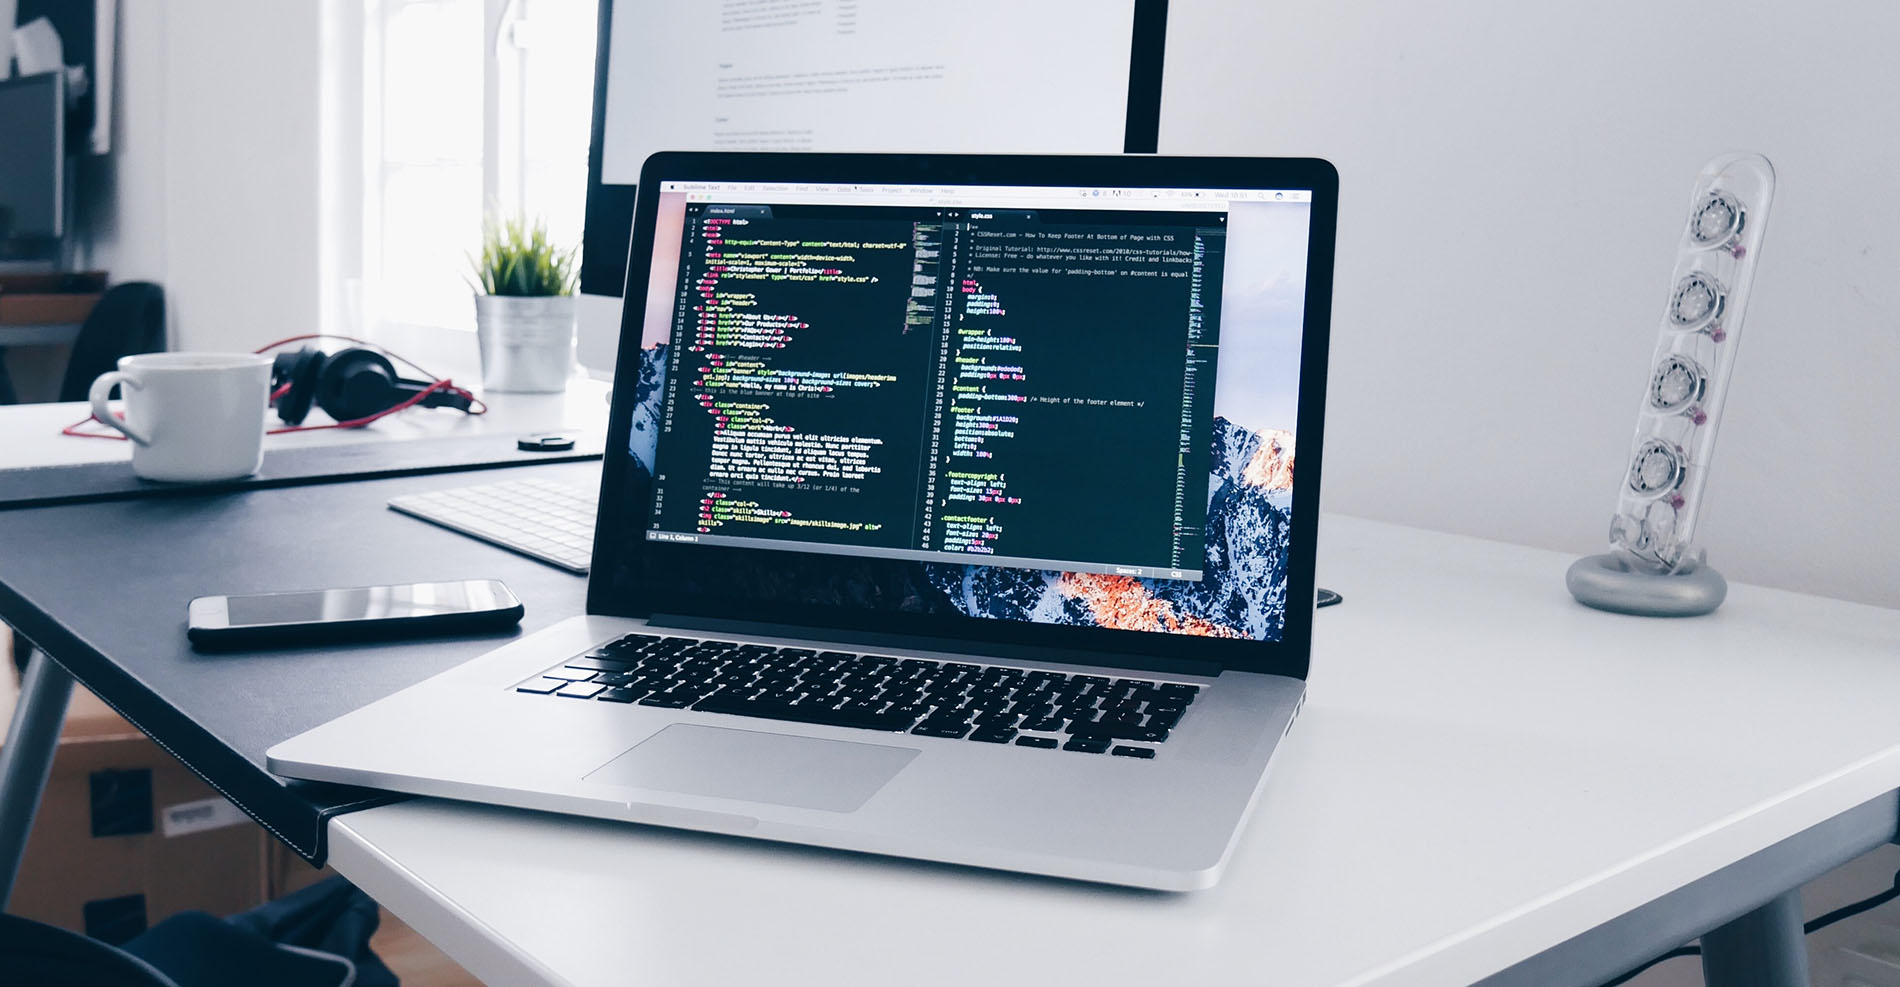 3 Steps to Get Started as a Web Developer